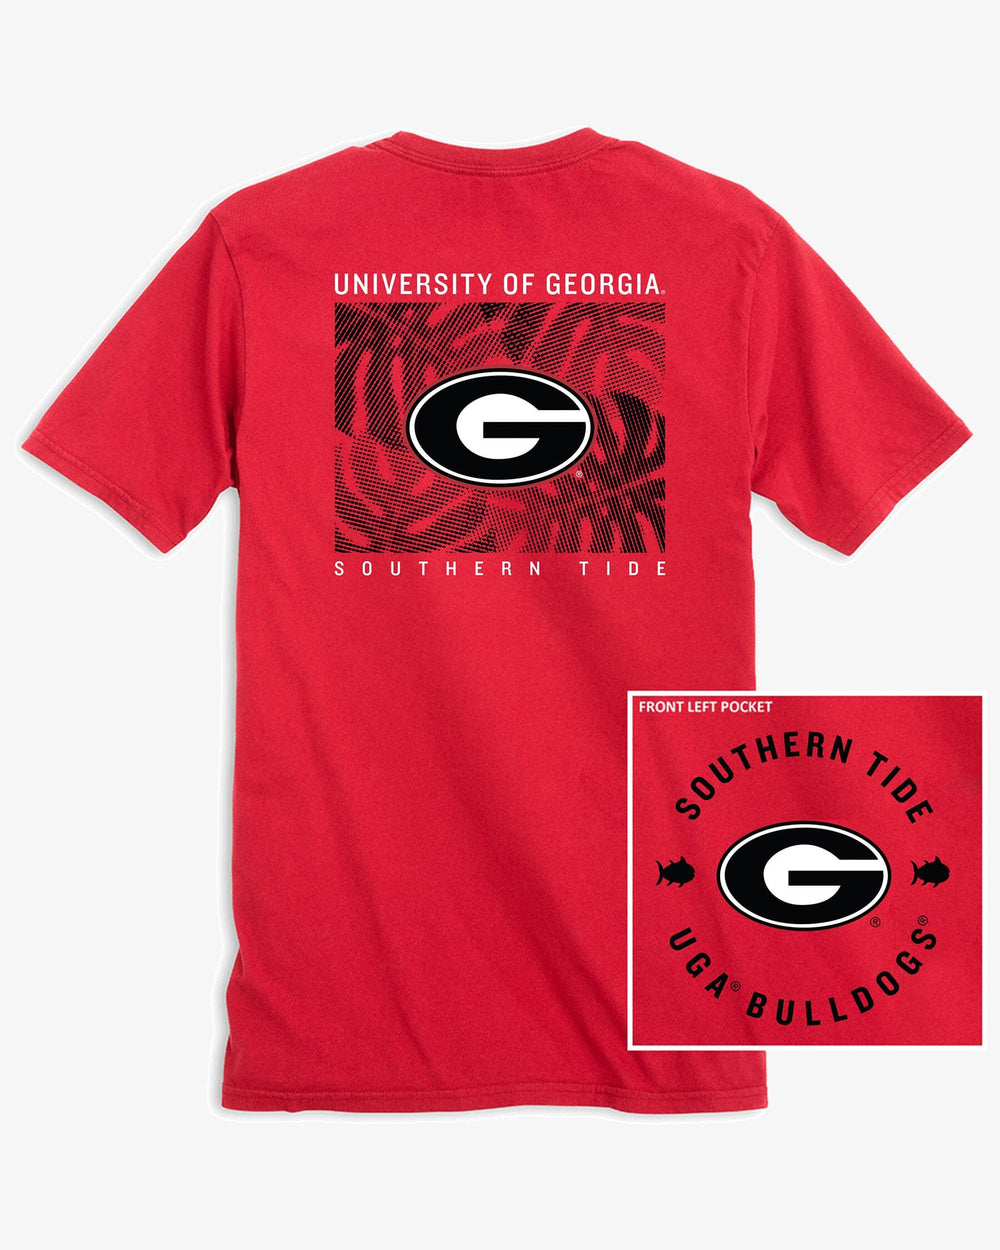 The view of the Georgia Bulldogs Halftone Monstera T-Shirt - Varsity Red